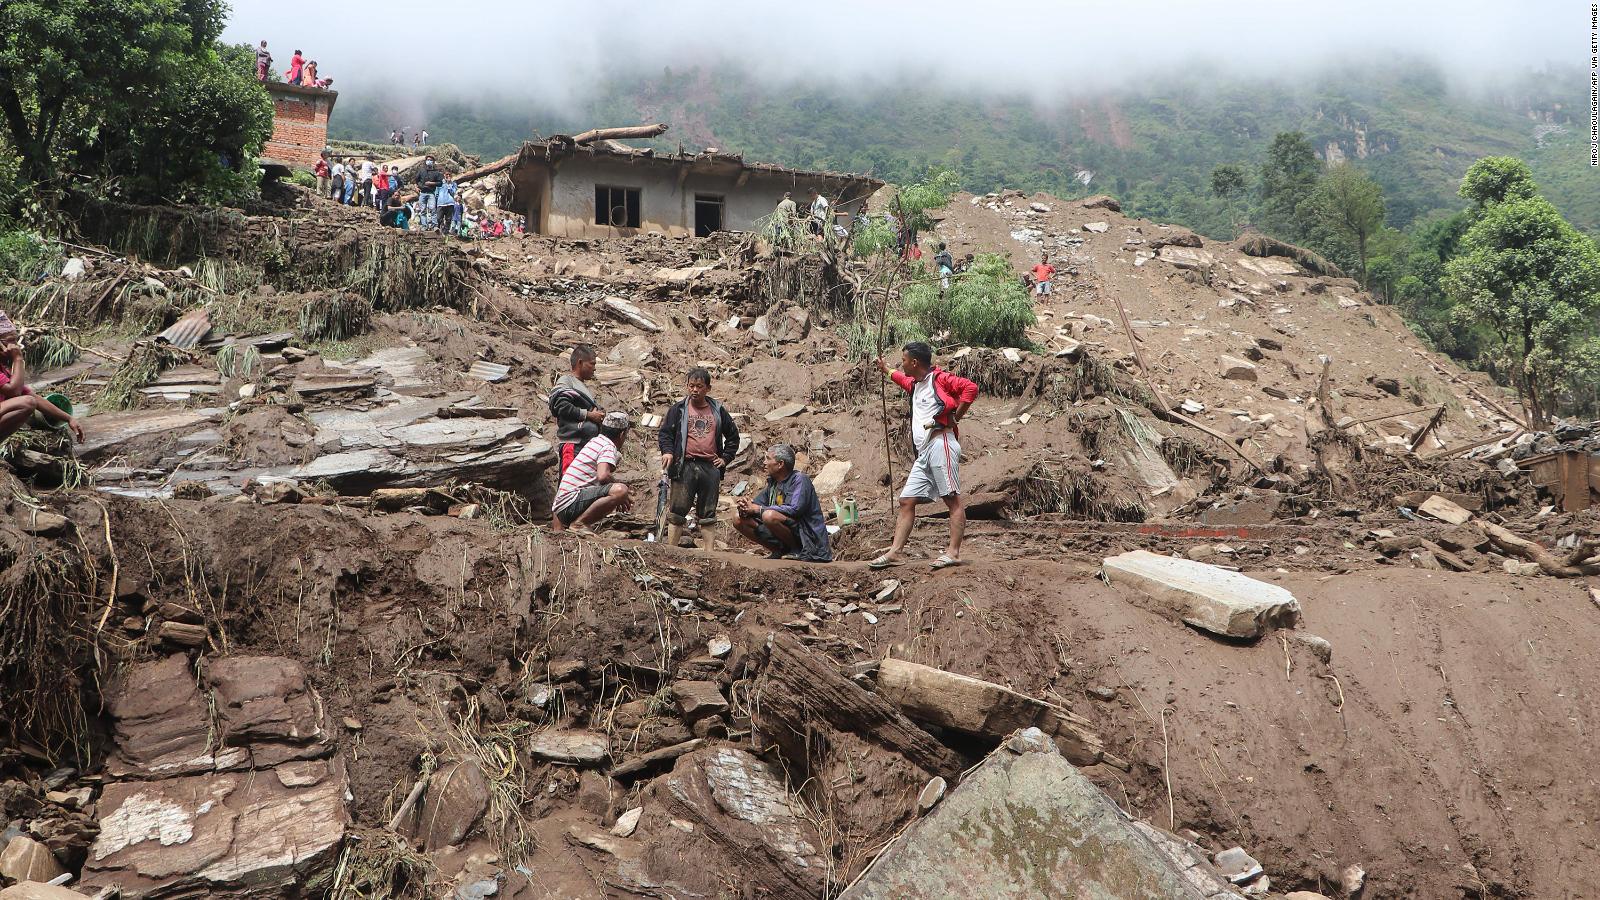 A Landslide In Nepal Killed At Least 11 People 20 Others Remain Missing Cnn